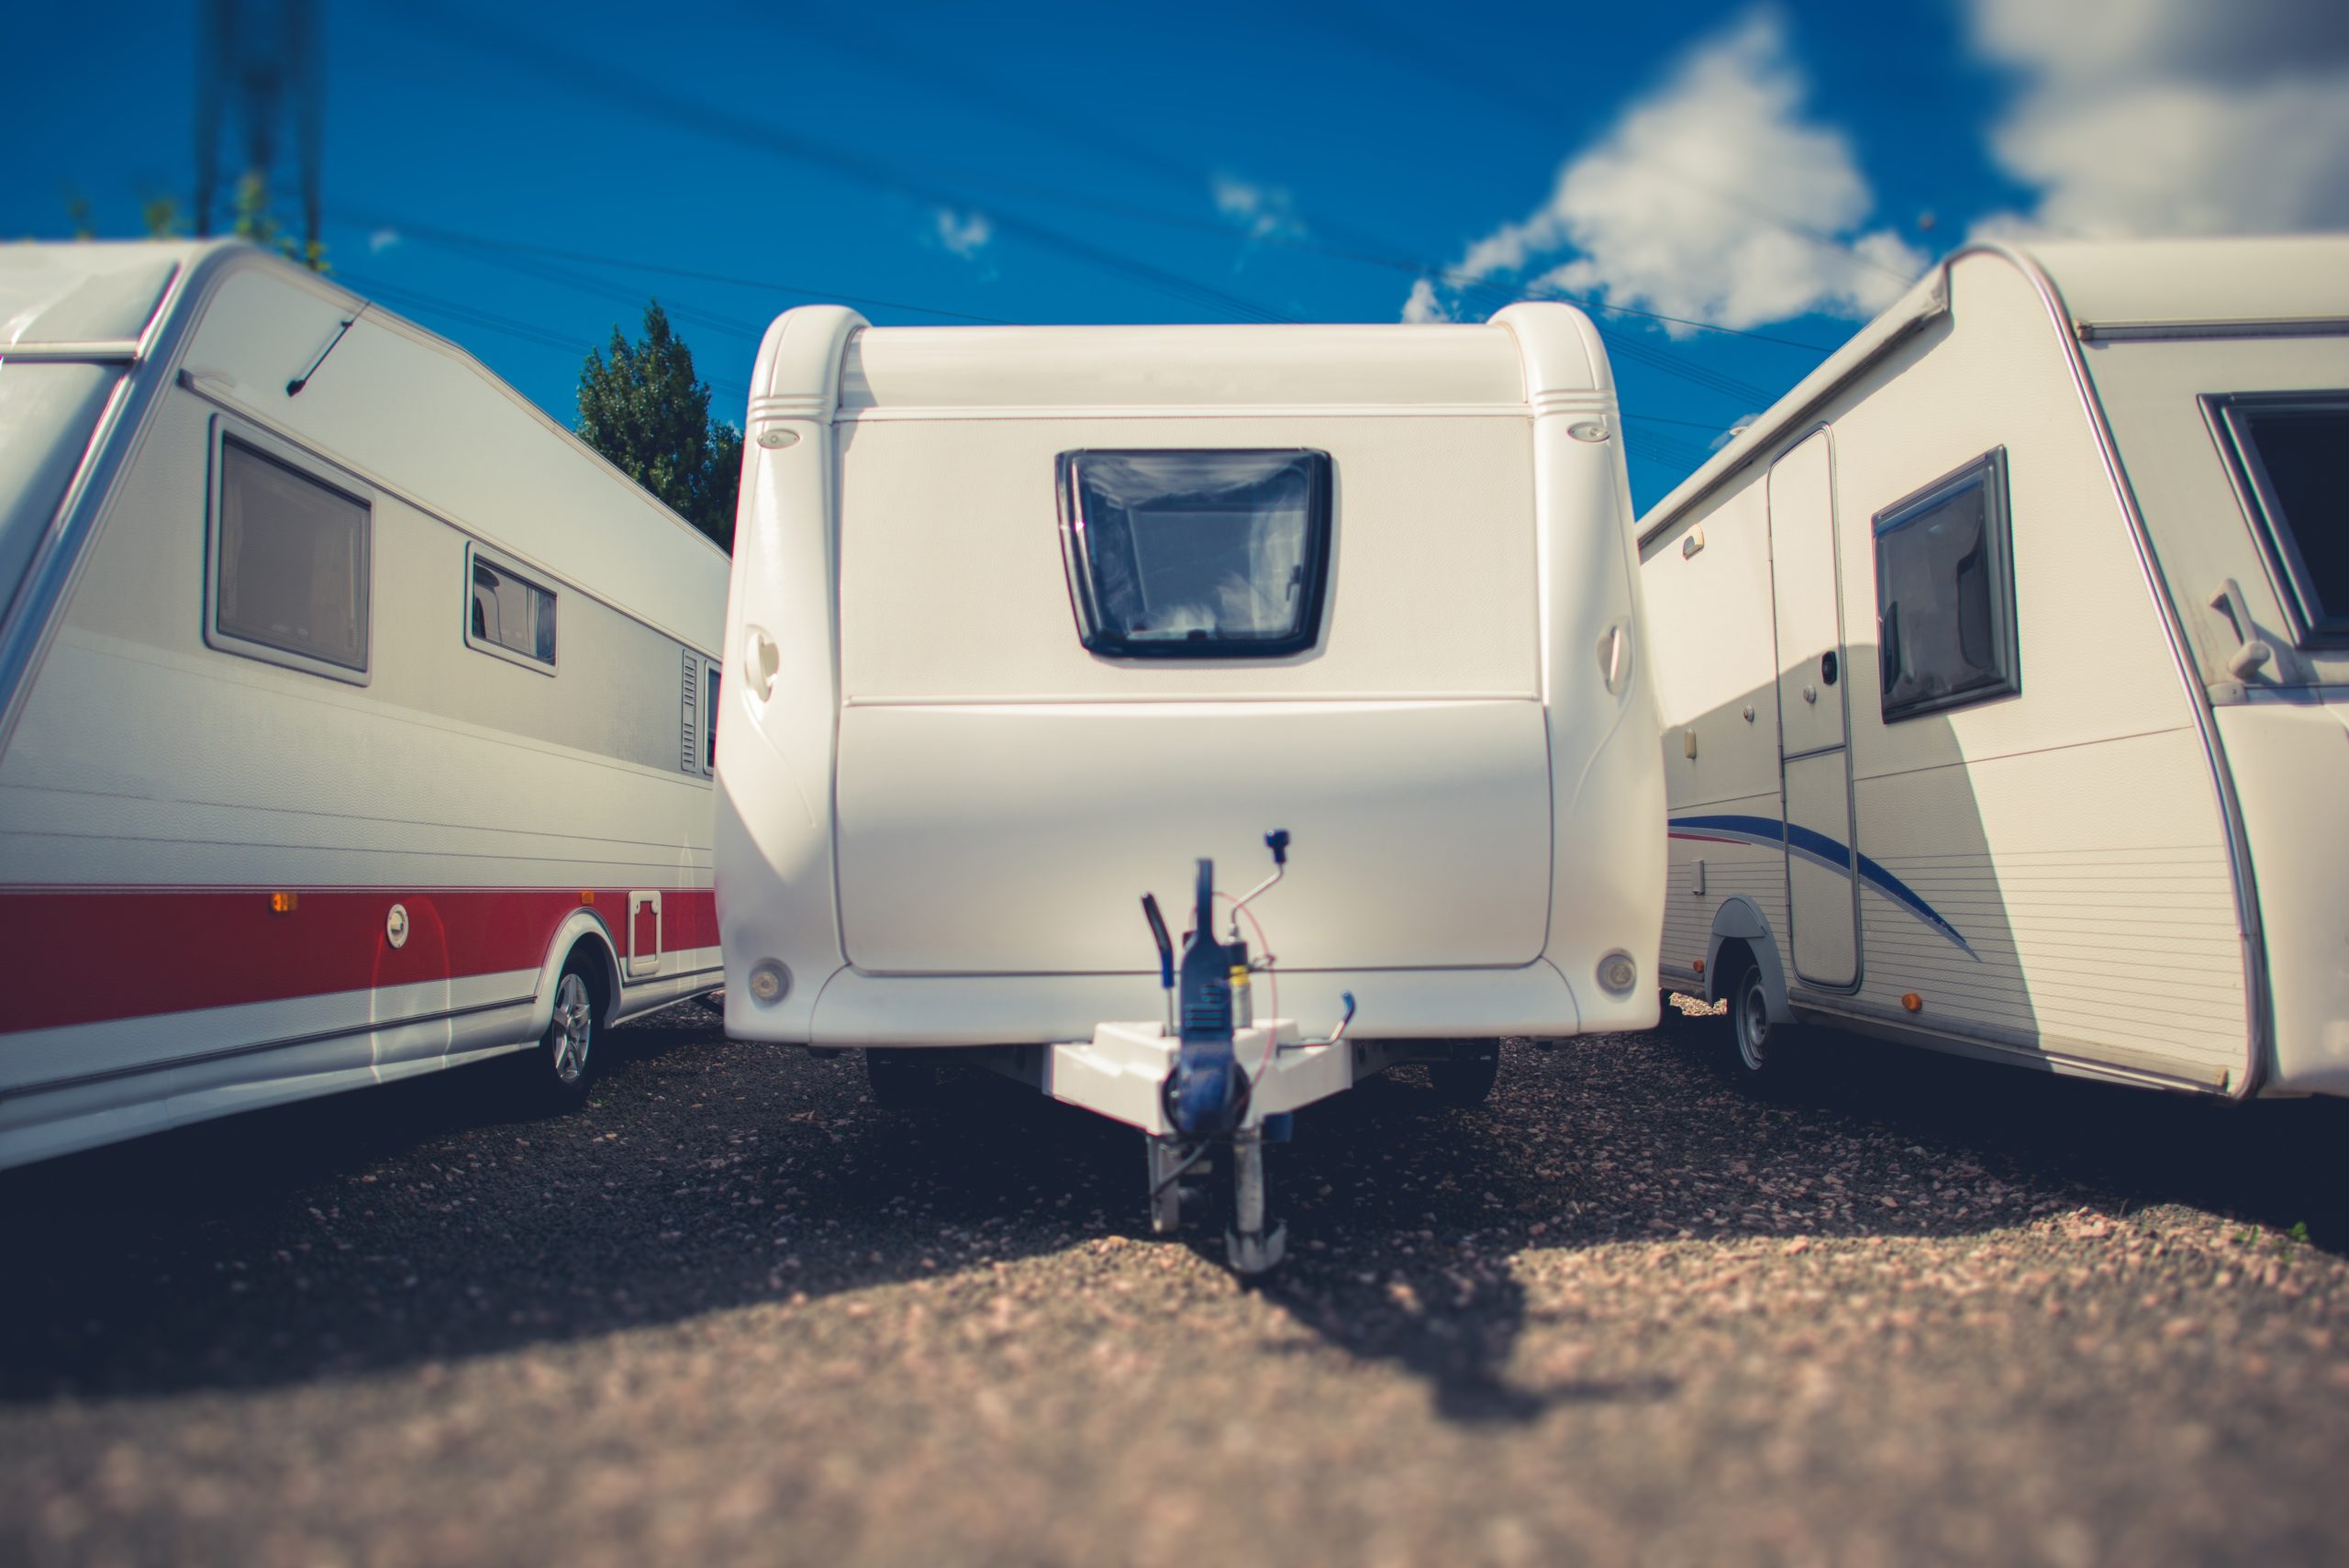 Campers and RVs in gravel lot